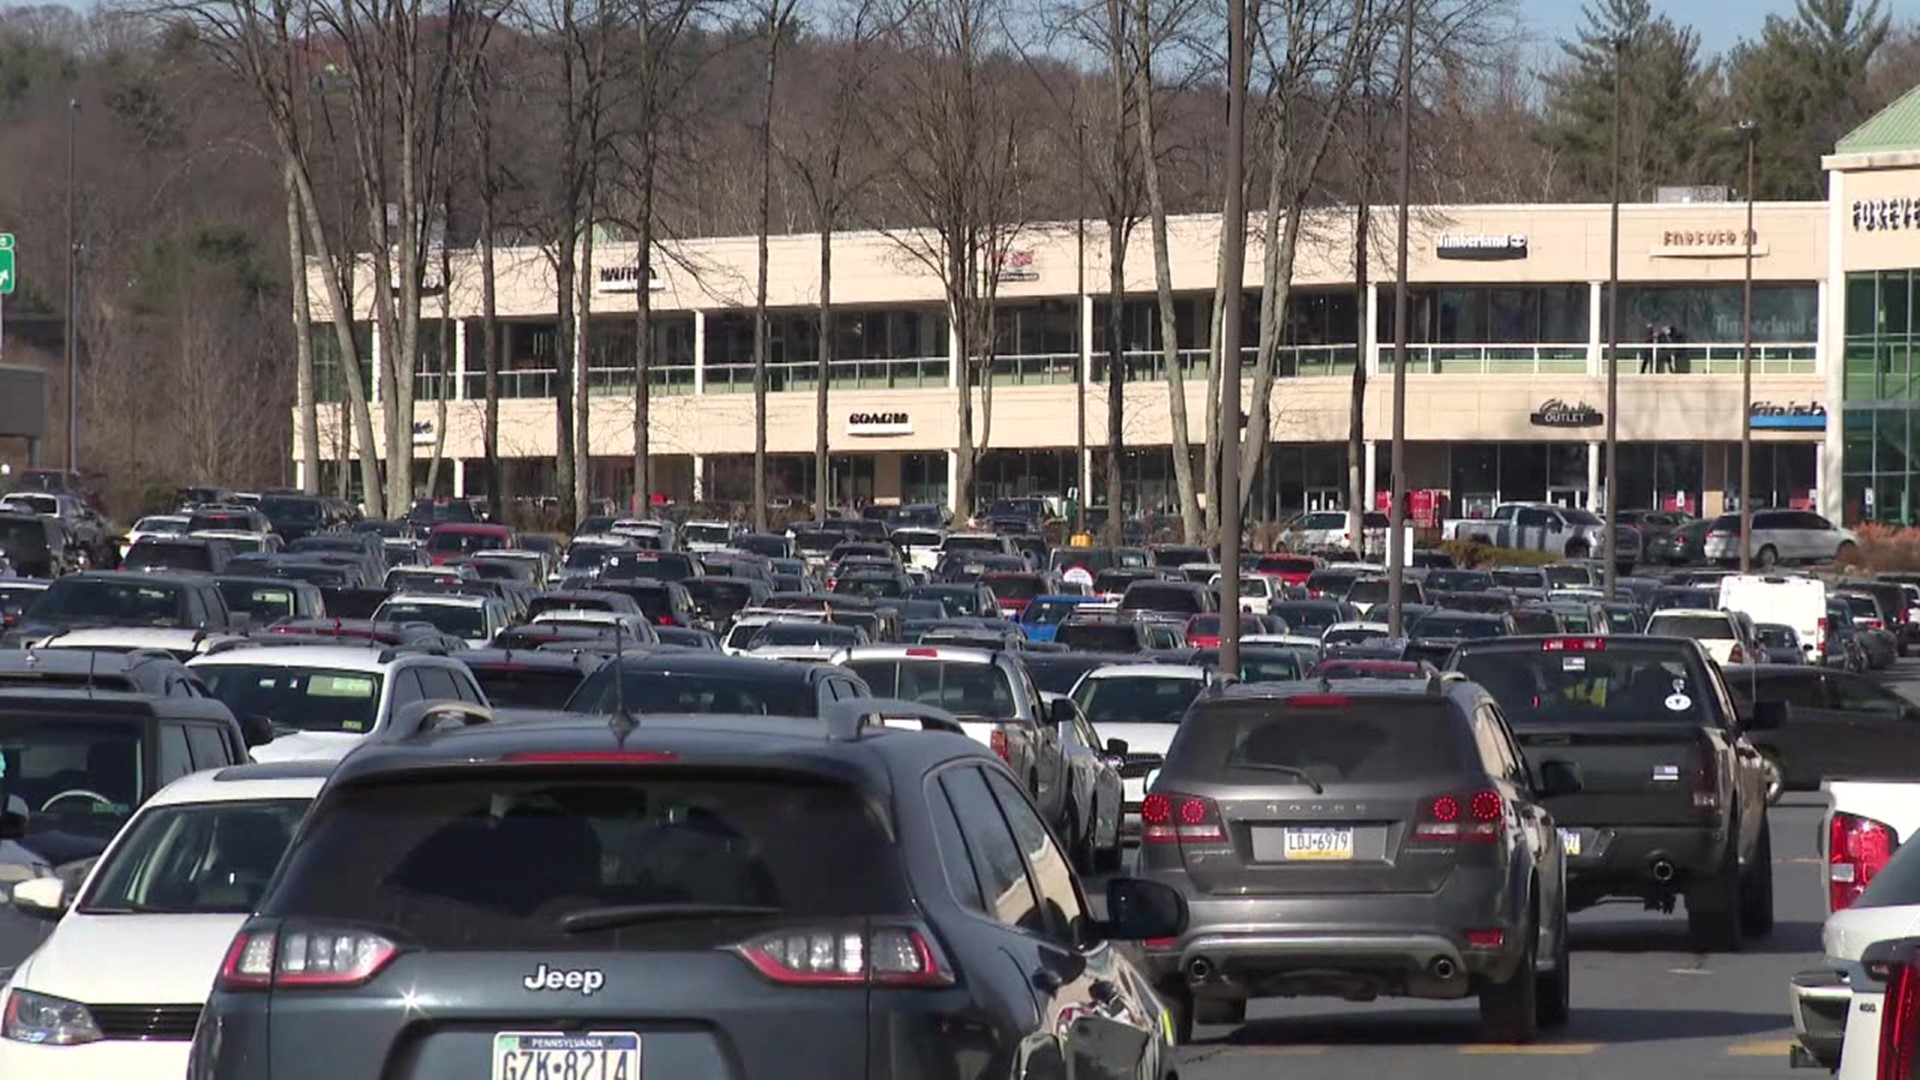 Lots of people spent this Monday before Christmas at the Crossings Premium Outlets near Tannersville.